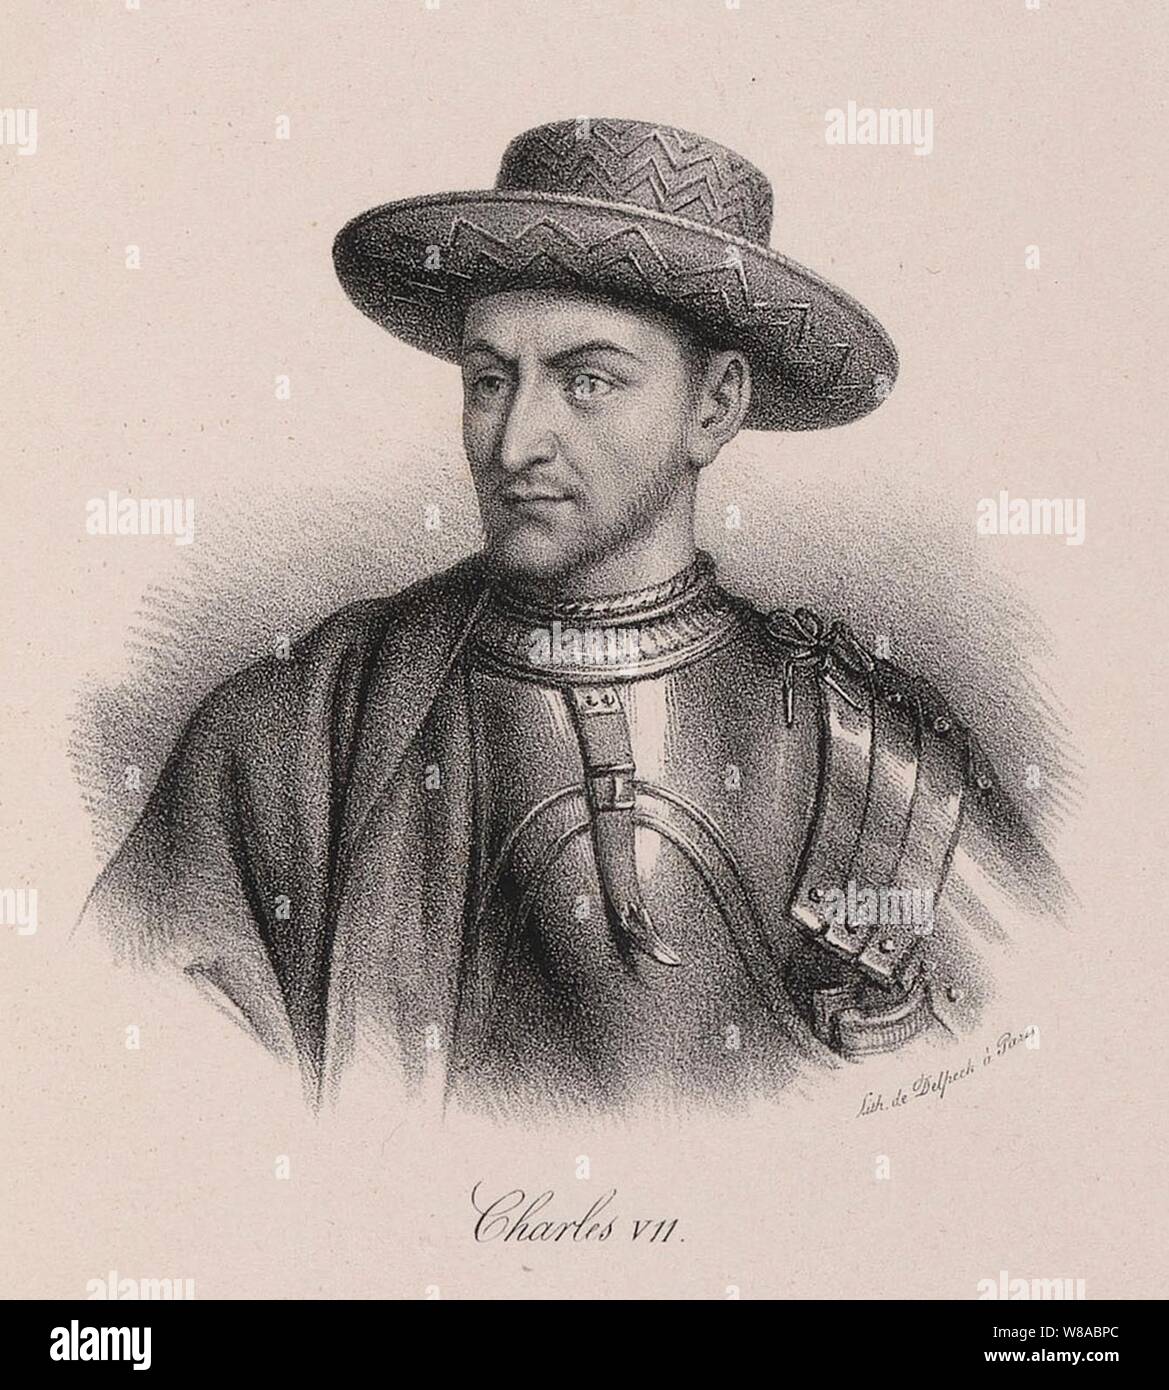 Delpech - Charles VII of France. Stock Photo